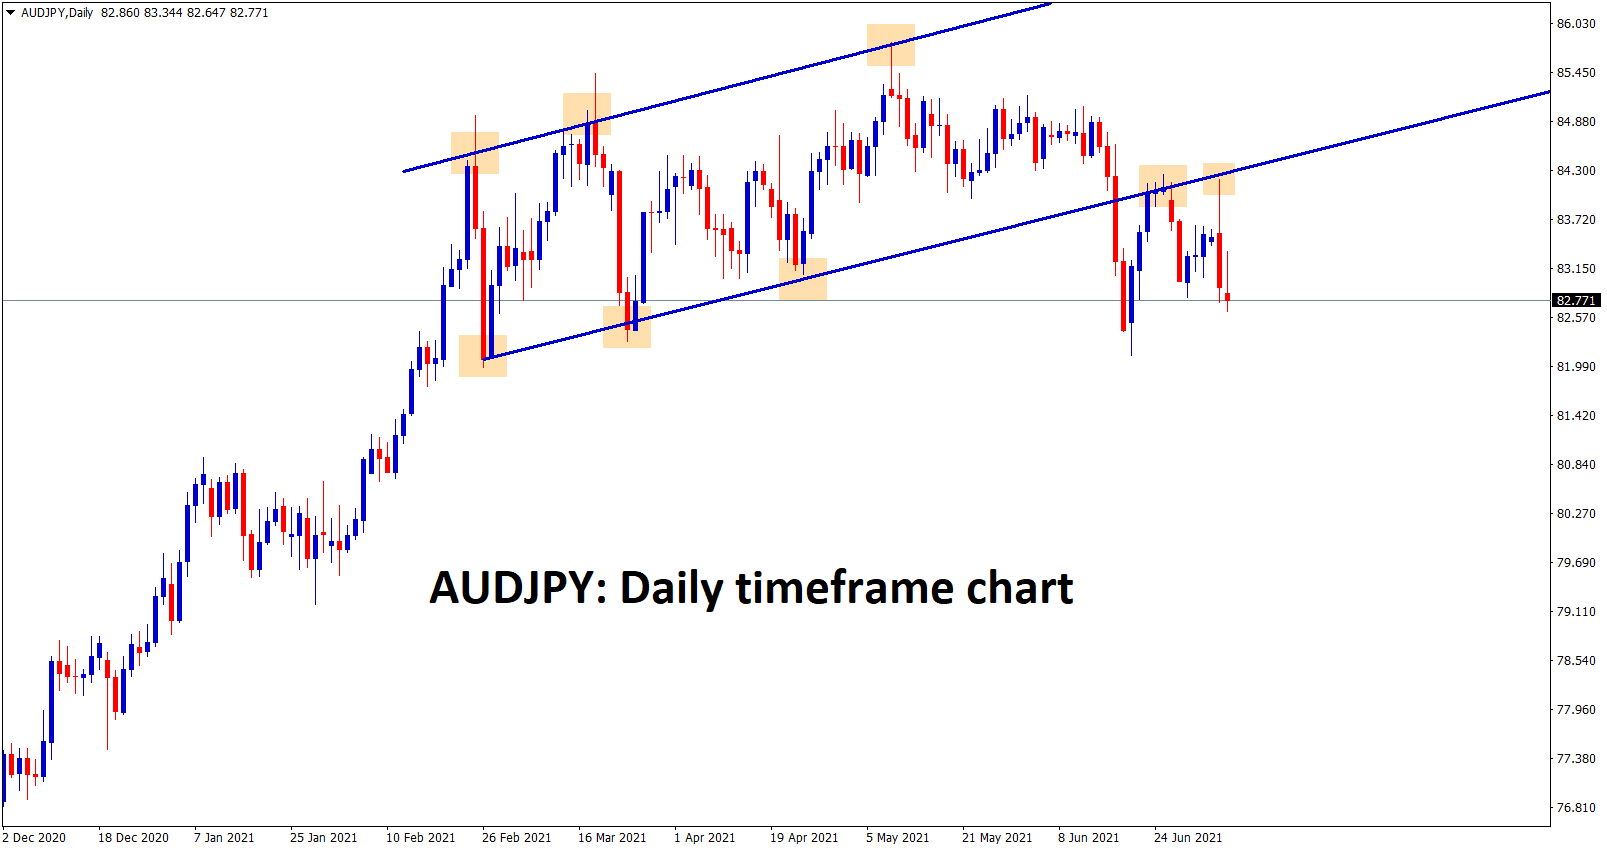 AUDJPY is falling after retesting the broken line of the Ascending channel.